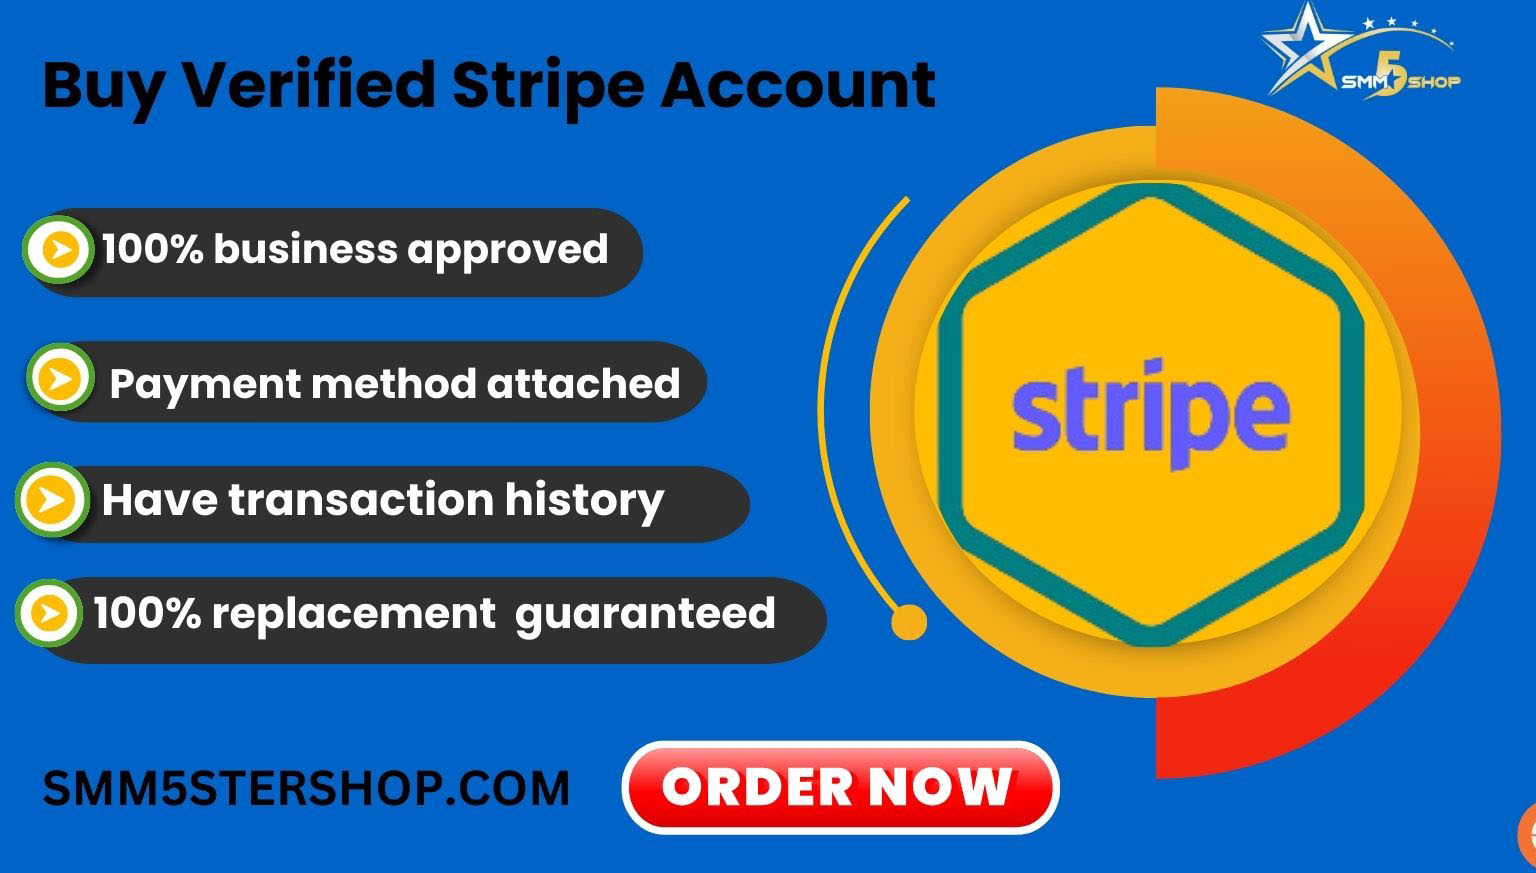 Buy verified stripe account at smm5starshop.com at the best price. Our ccounts will be verified with email, SSN, Drivers’ license, Passport, LLC, TIN, EIN.